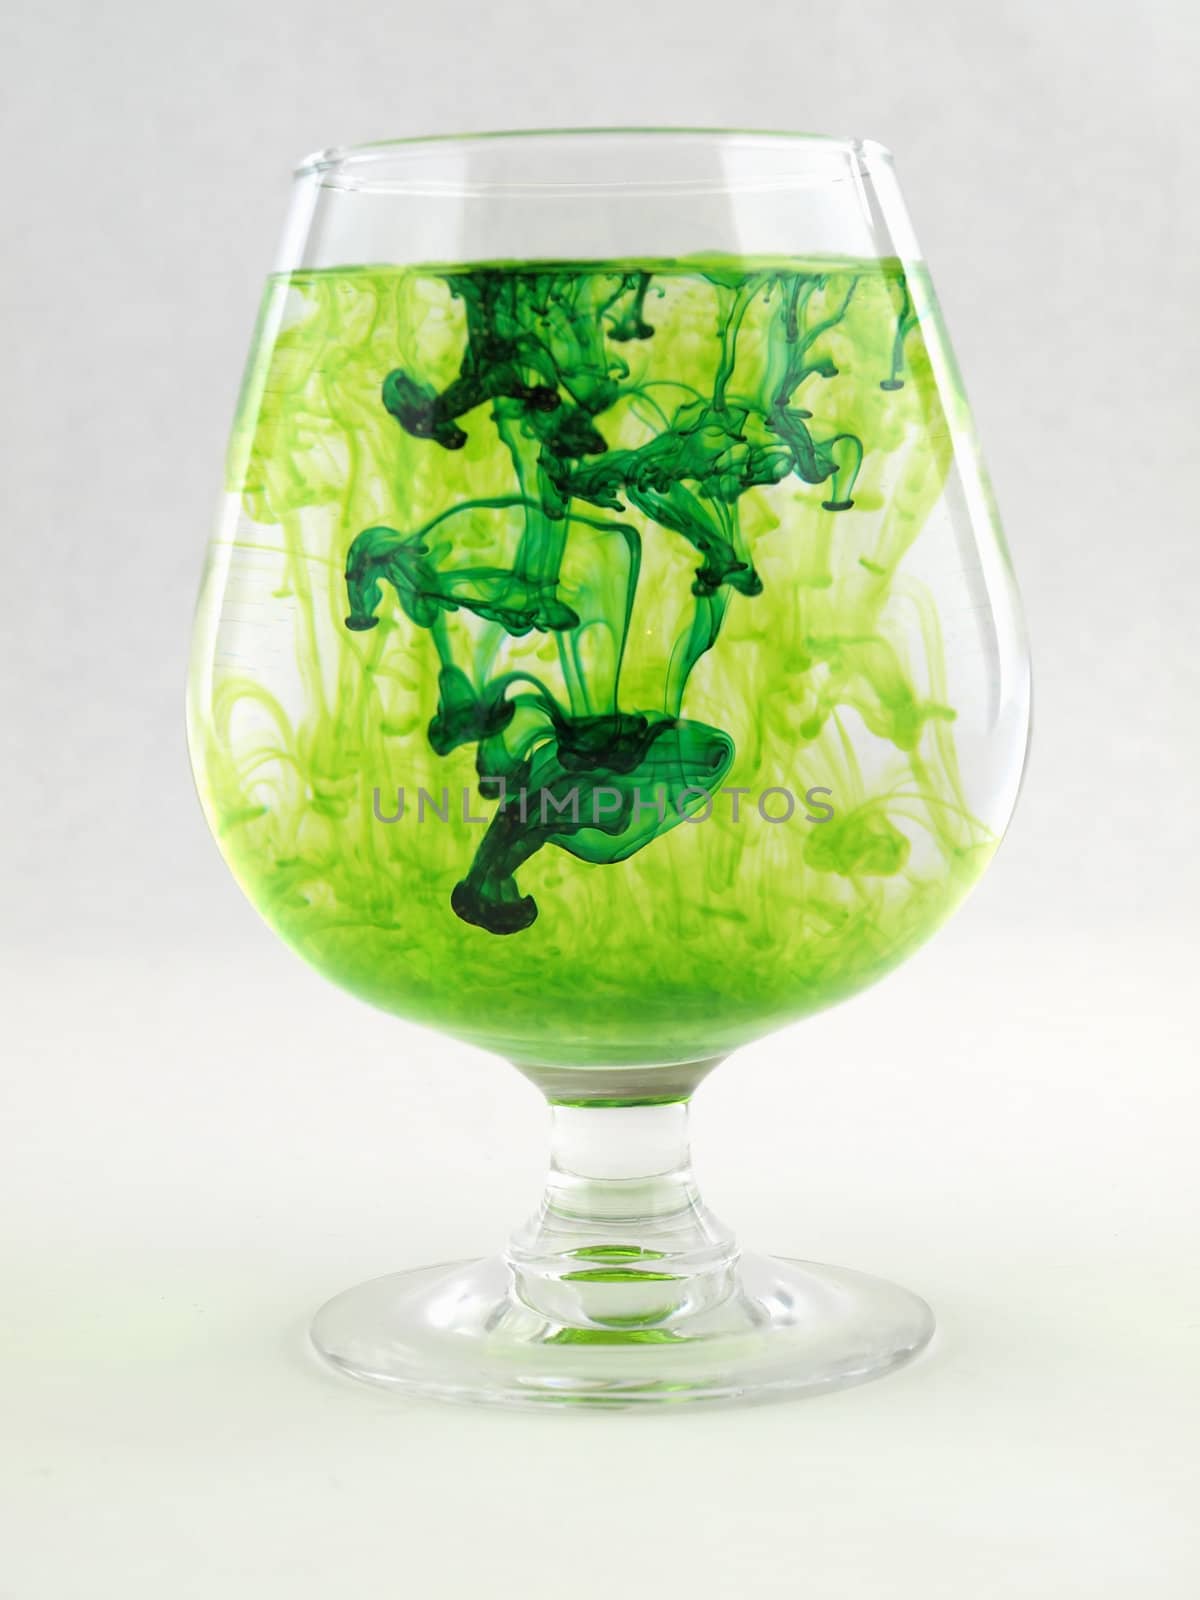 A liquid filled glass with green swirls over a white background.